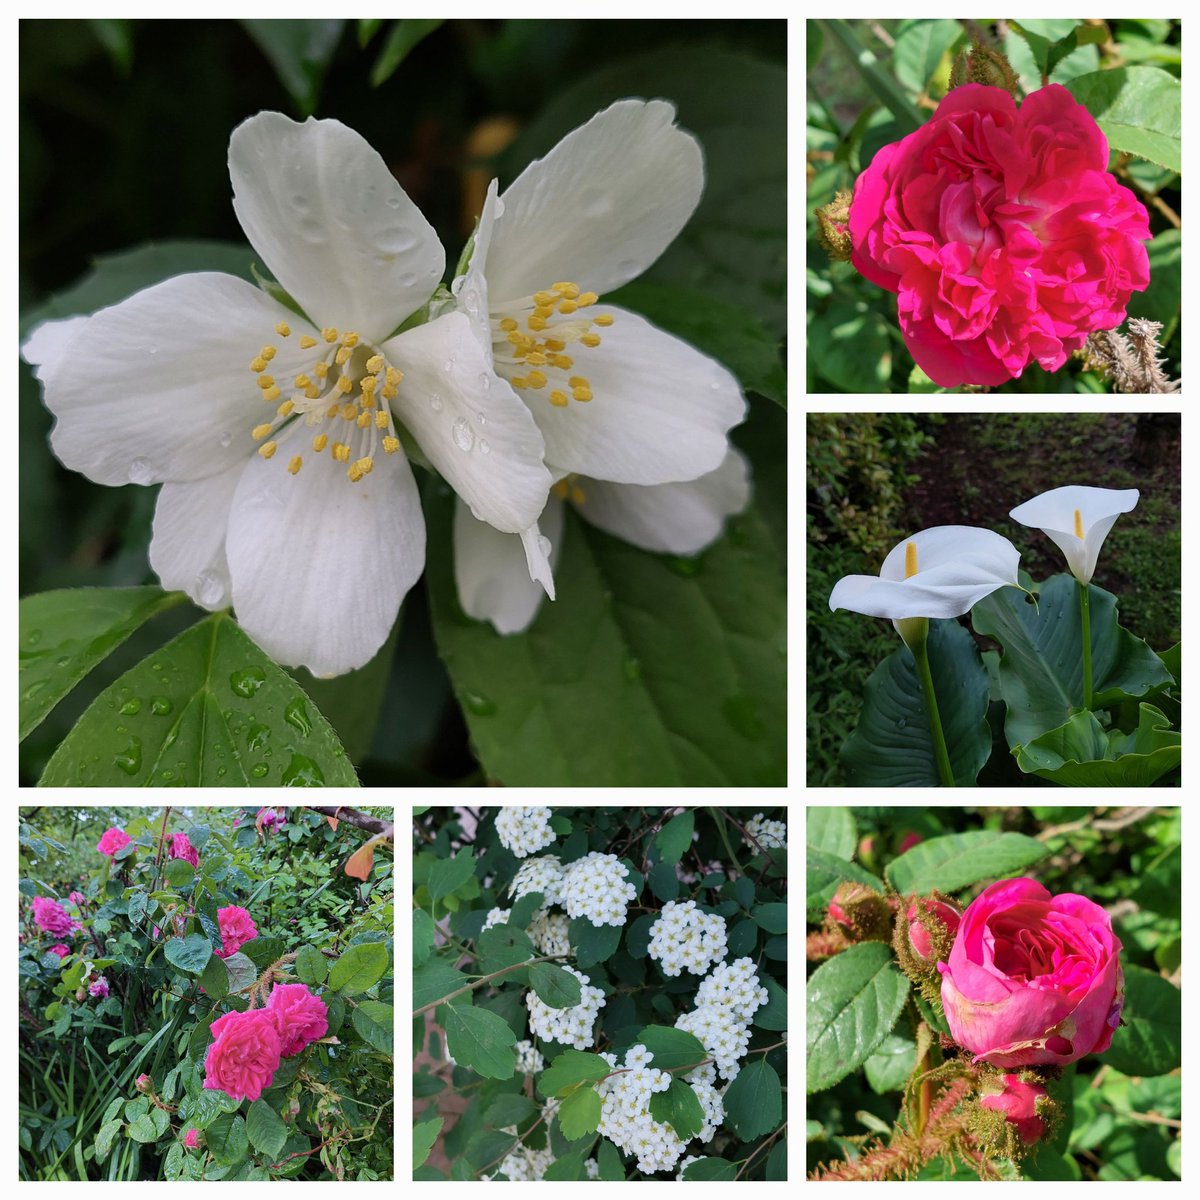 White and pink flowers in the garden this week! #SixOnSaturday #garden #mygarden #May #flowers #GardeningTwitter #GardeningX Happy weekend!! 🌿💮🌿🌸🌿💮🌿